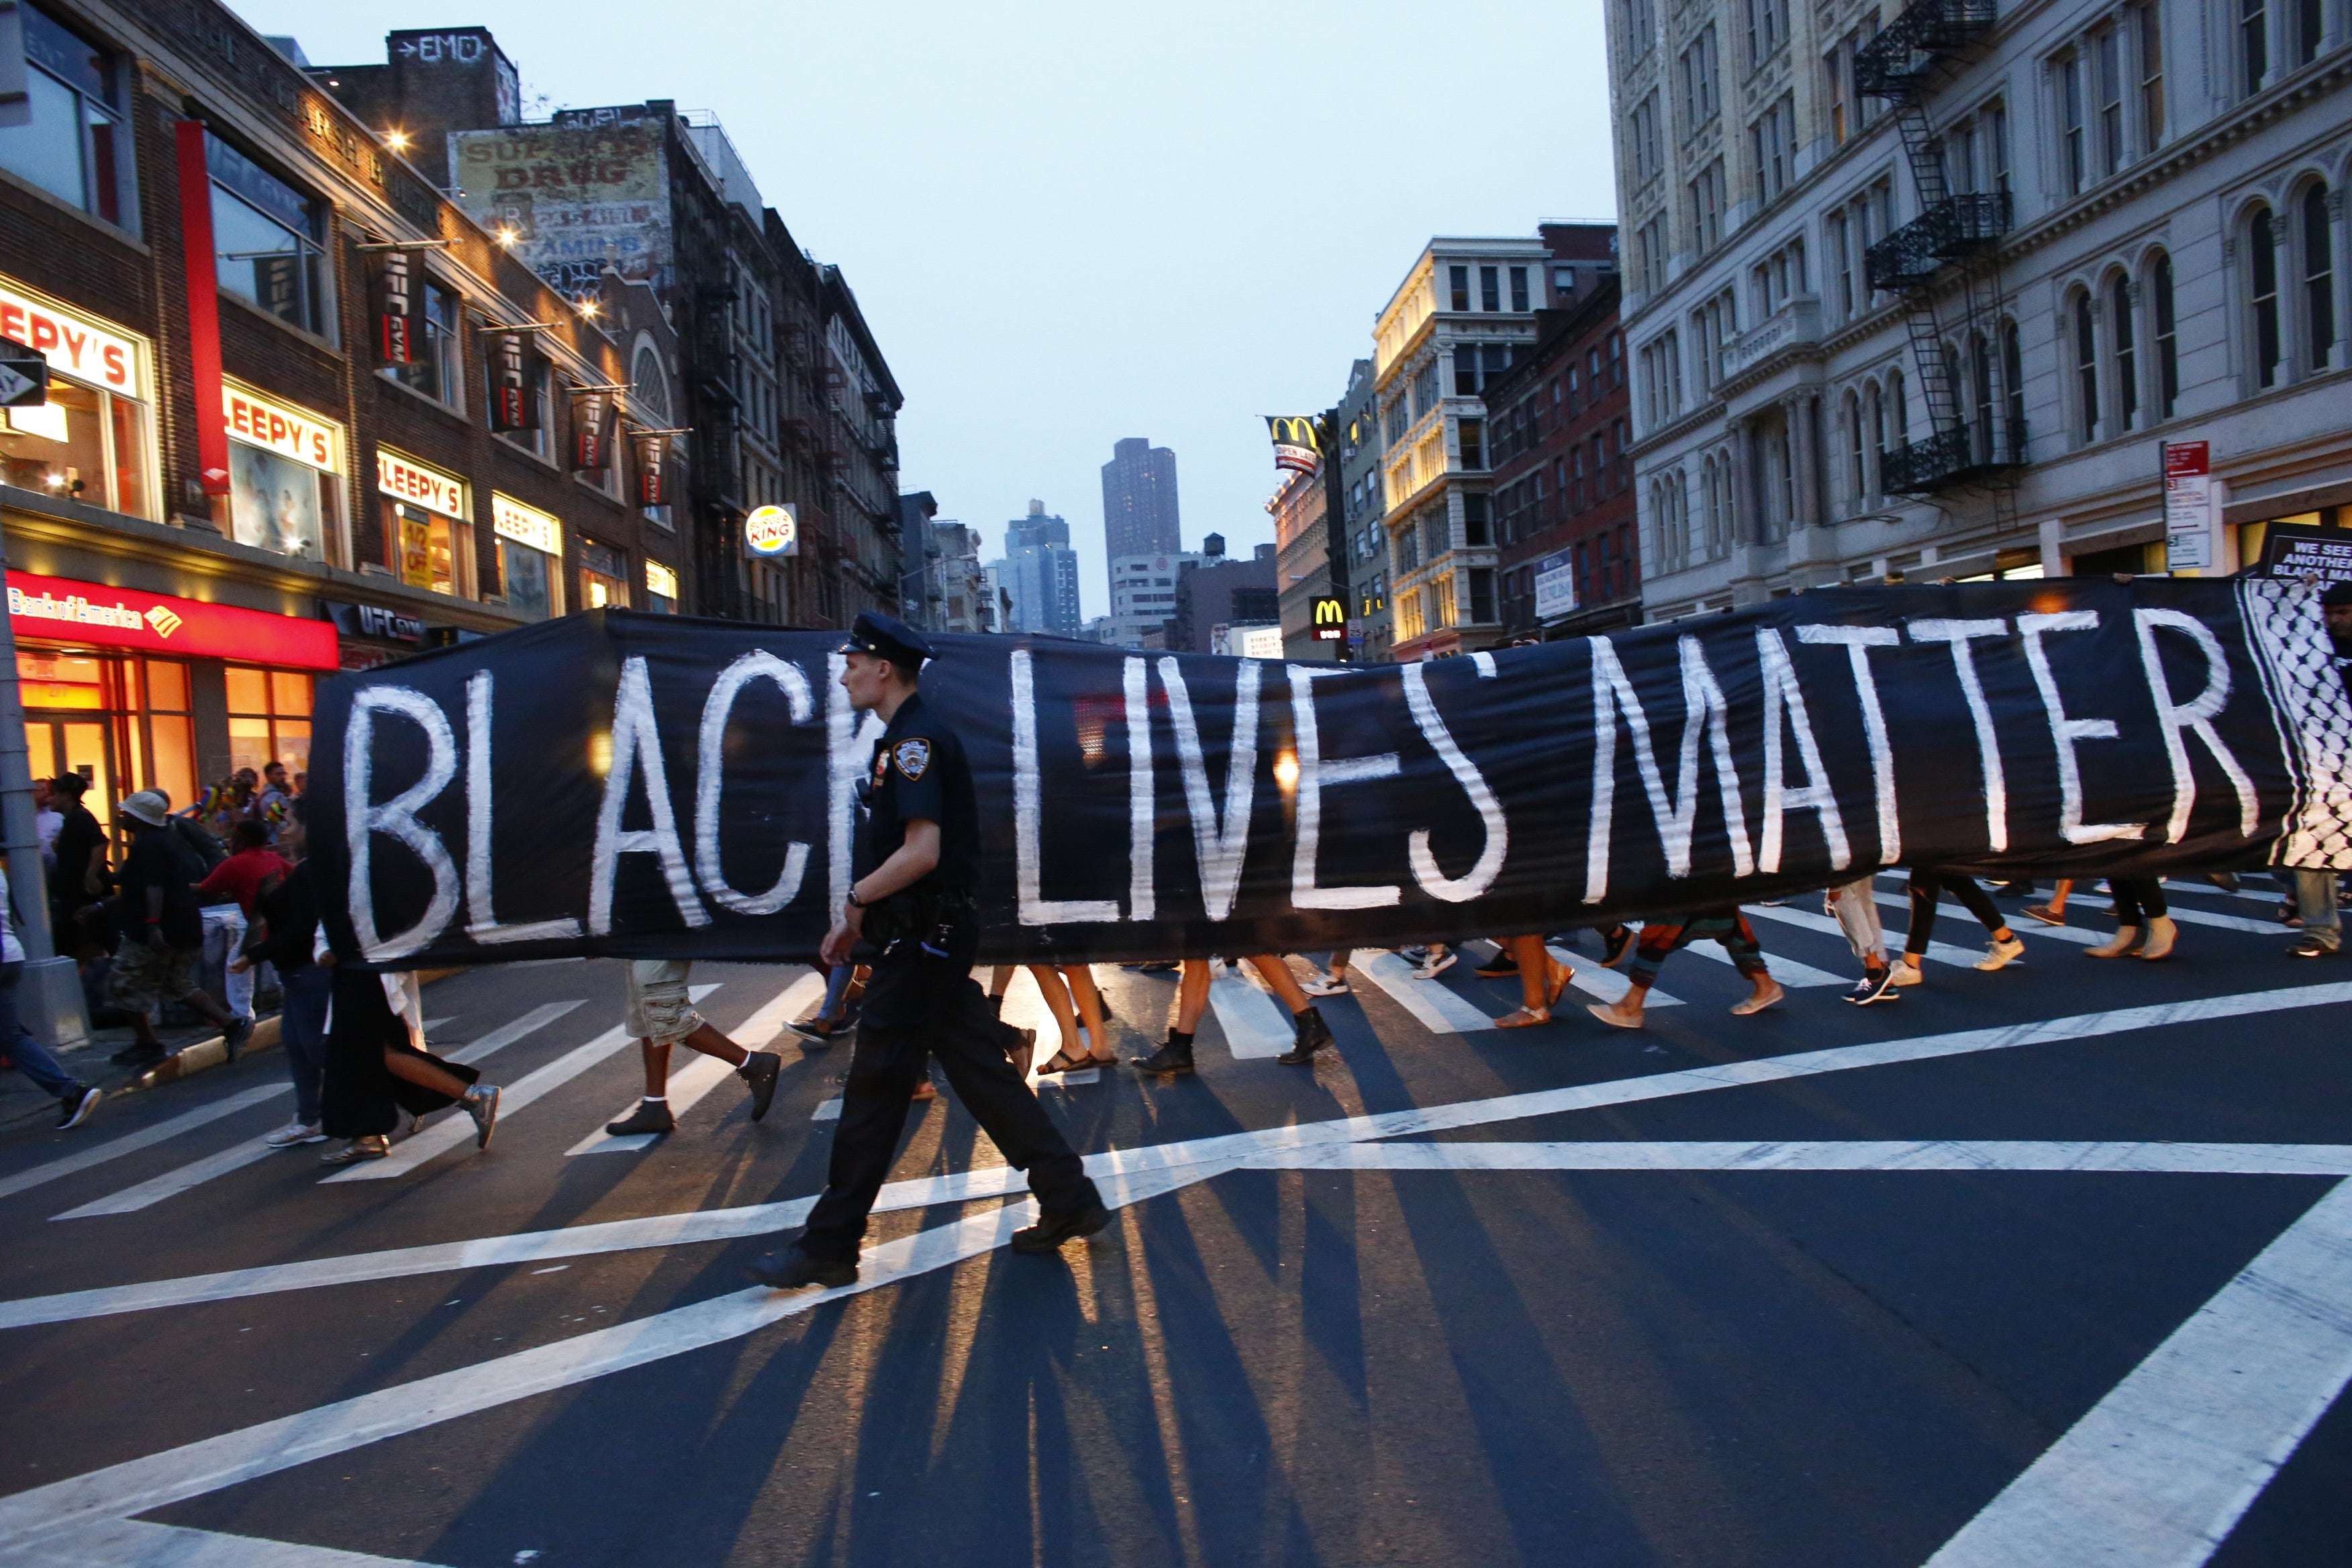 Documents Show FBI Monitored Black Lives Matter As 'Black Supremacist Extremists' 
